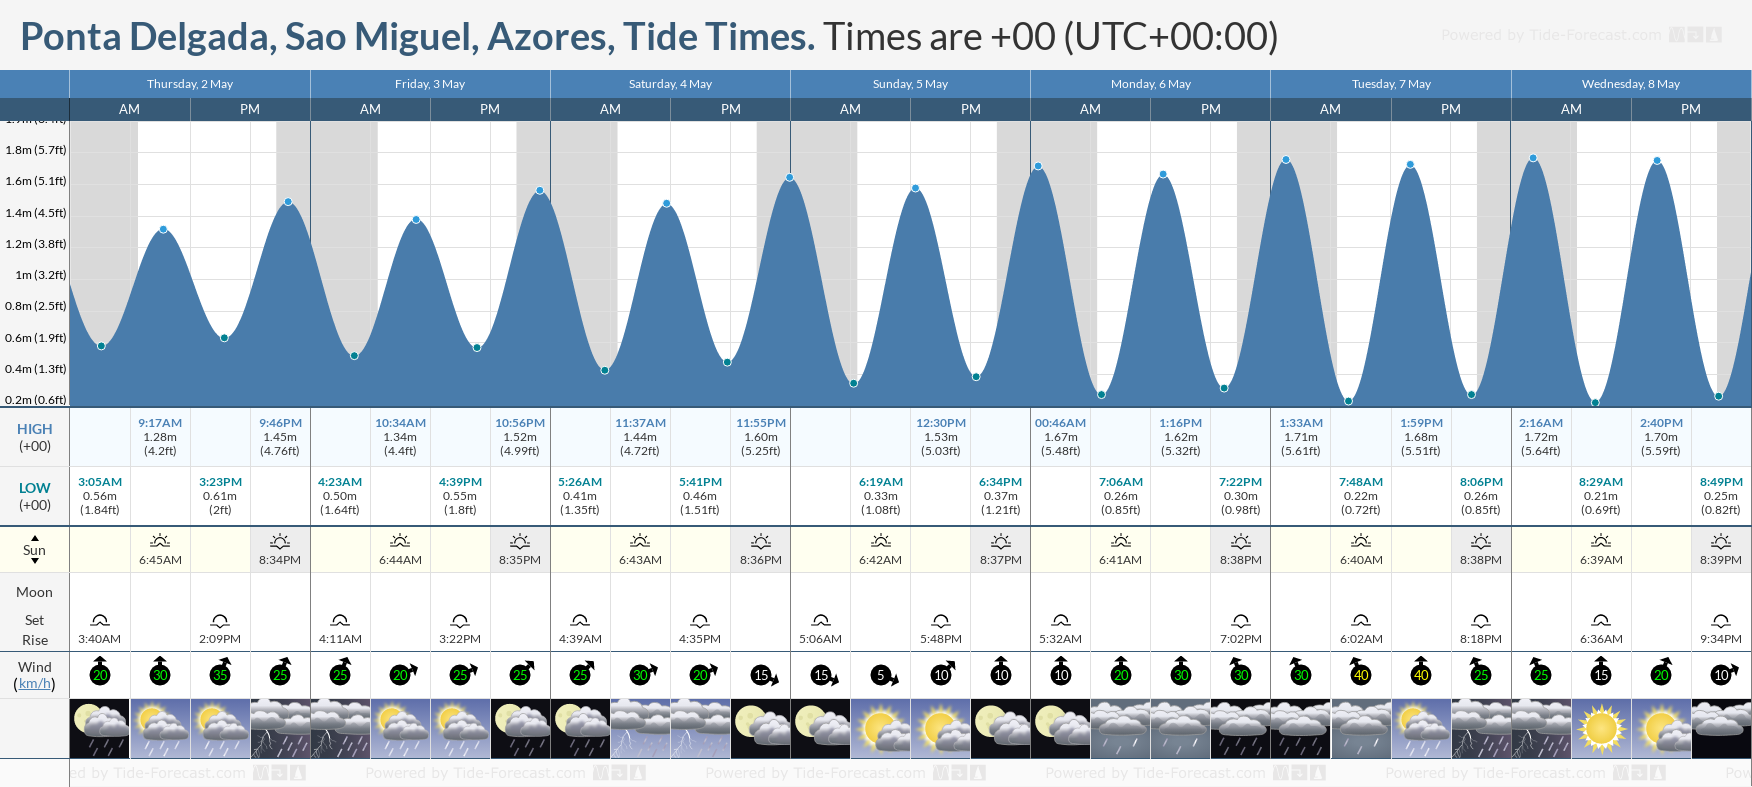 Ponta Delgada, Sao Miguel, Azores Tide Chart including high and low tide tide times for the next 7 days